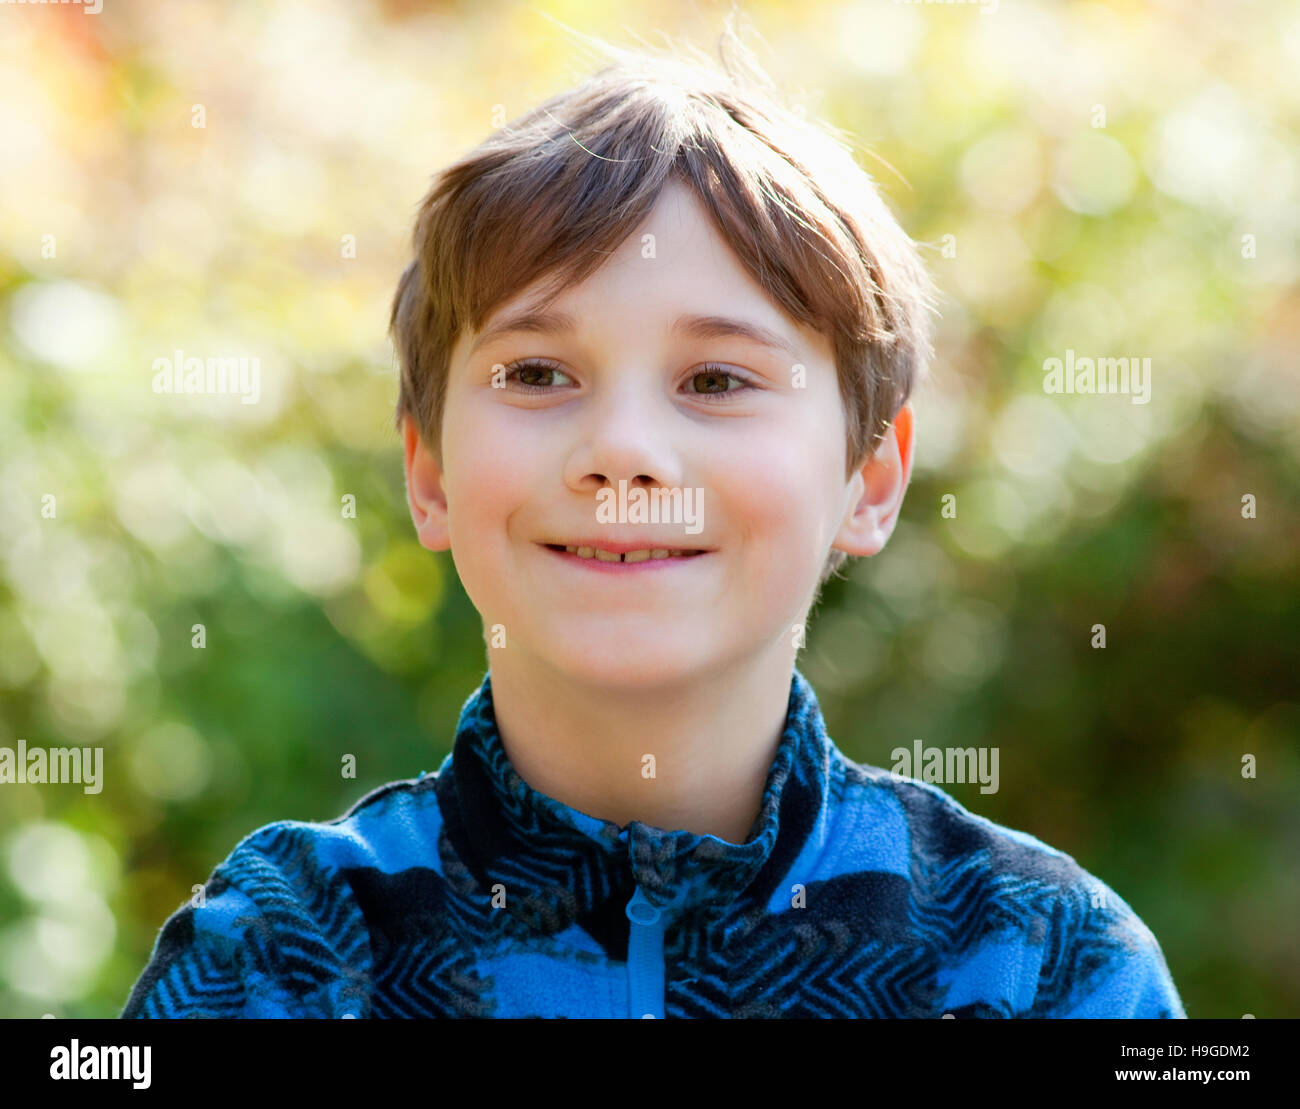 Portrait of a Boy with Brown Hair Outdoors Stock Photo